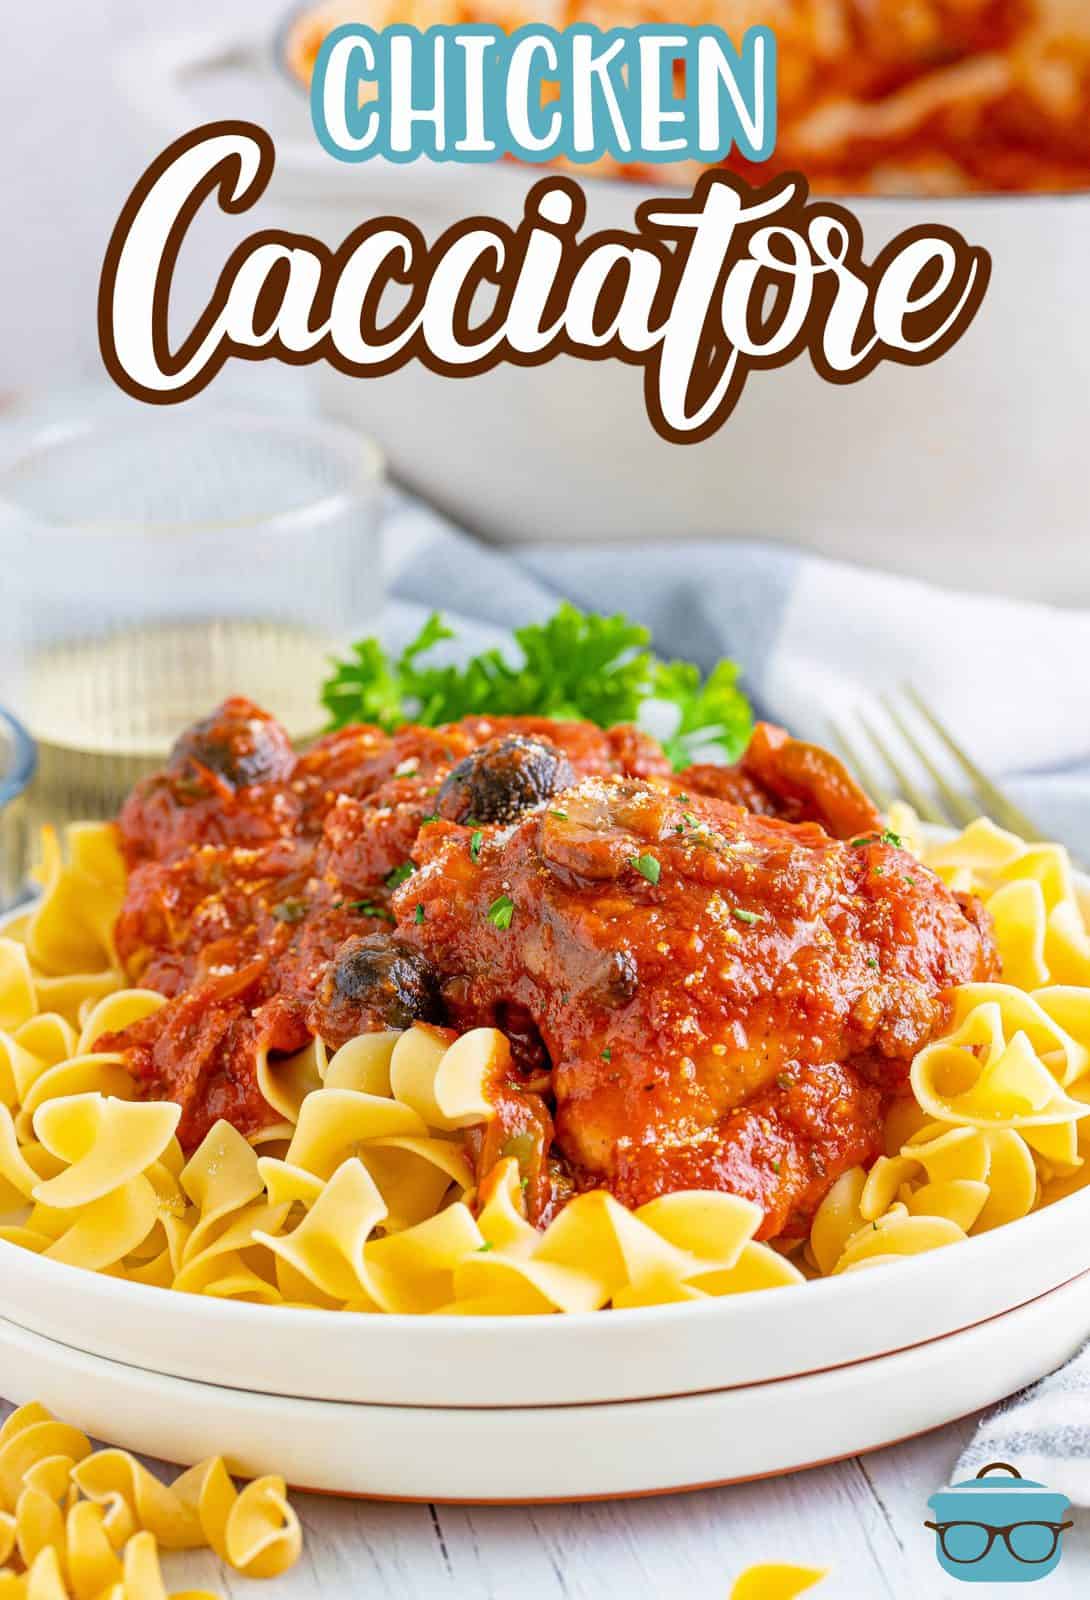 Chicken Cacciatore over noodles on white plate Pinterest image.